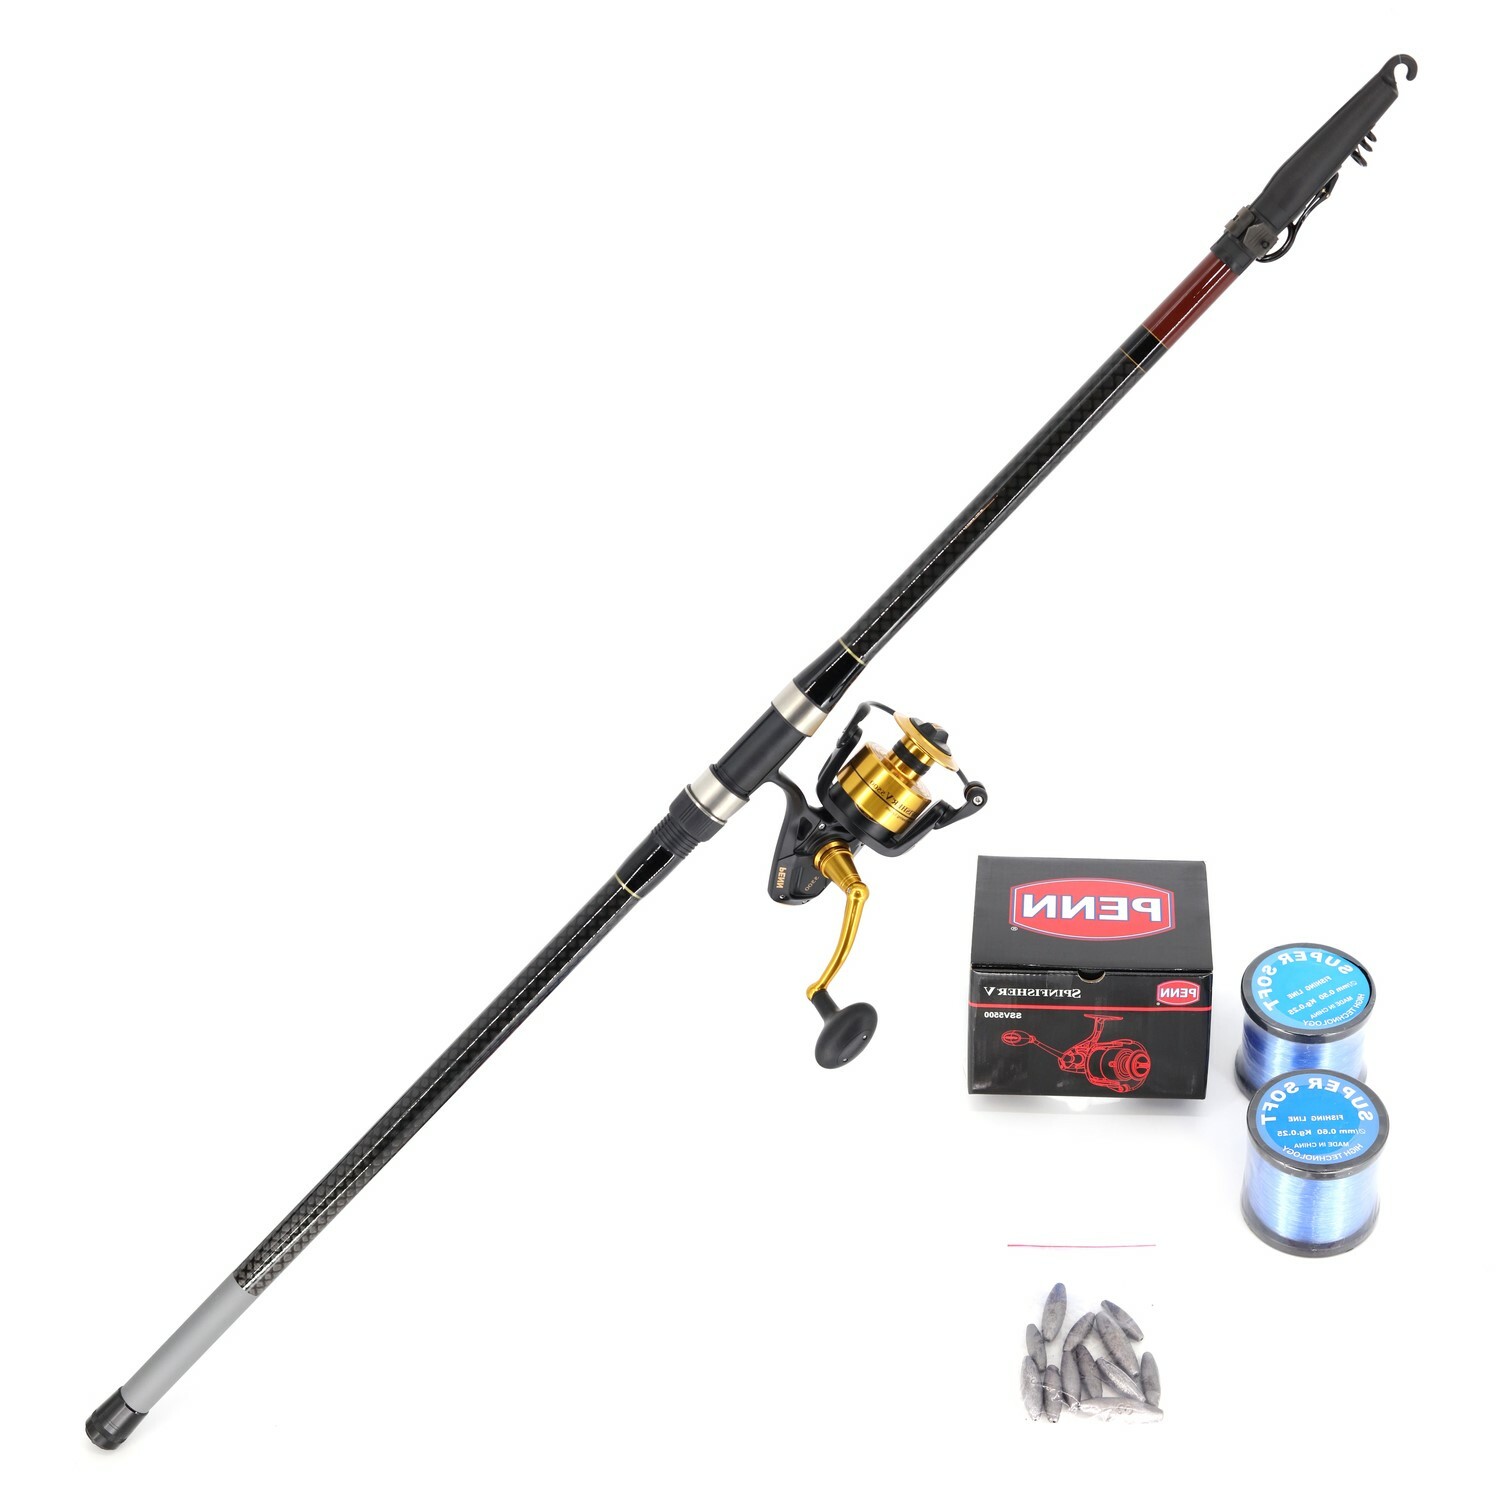 Shore Fishing (Pilot 4.5m and Penn V5500 including Nylon line with rigs and sinkers) Combo